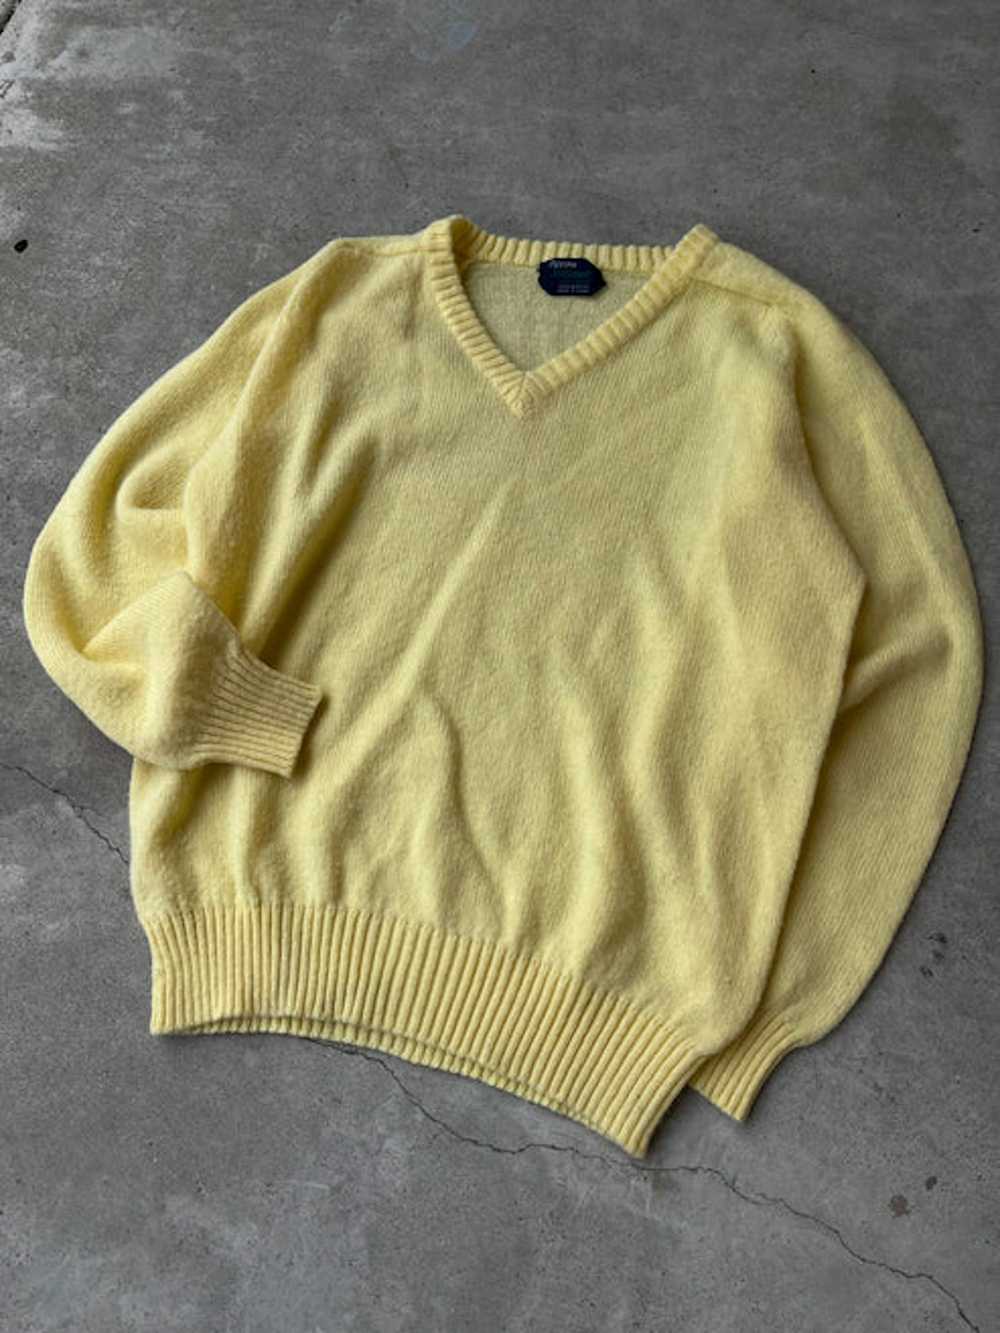 Vintage 00s Yellow Knitted Sweater - image 2